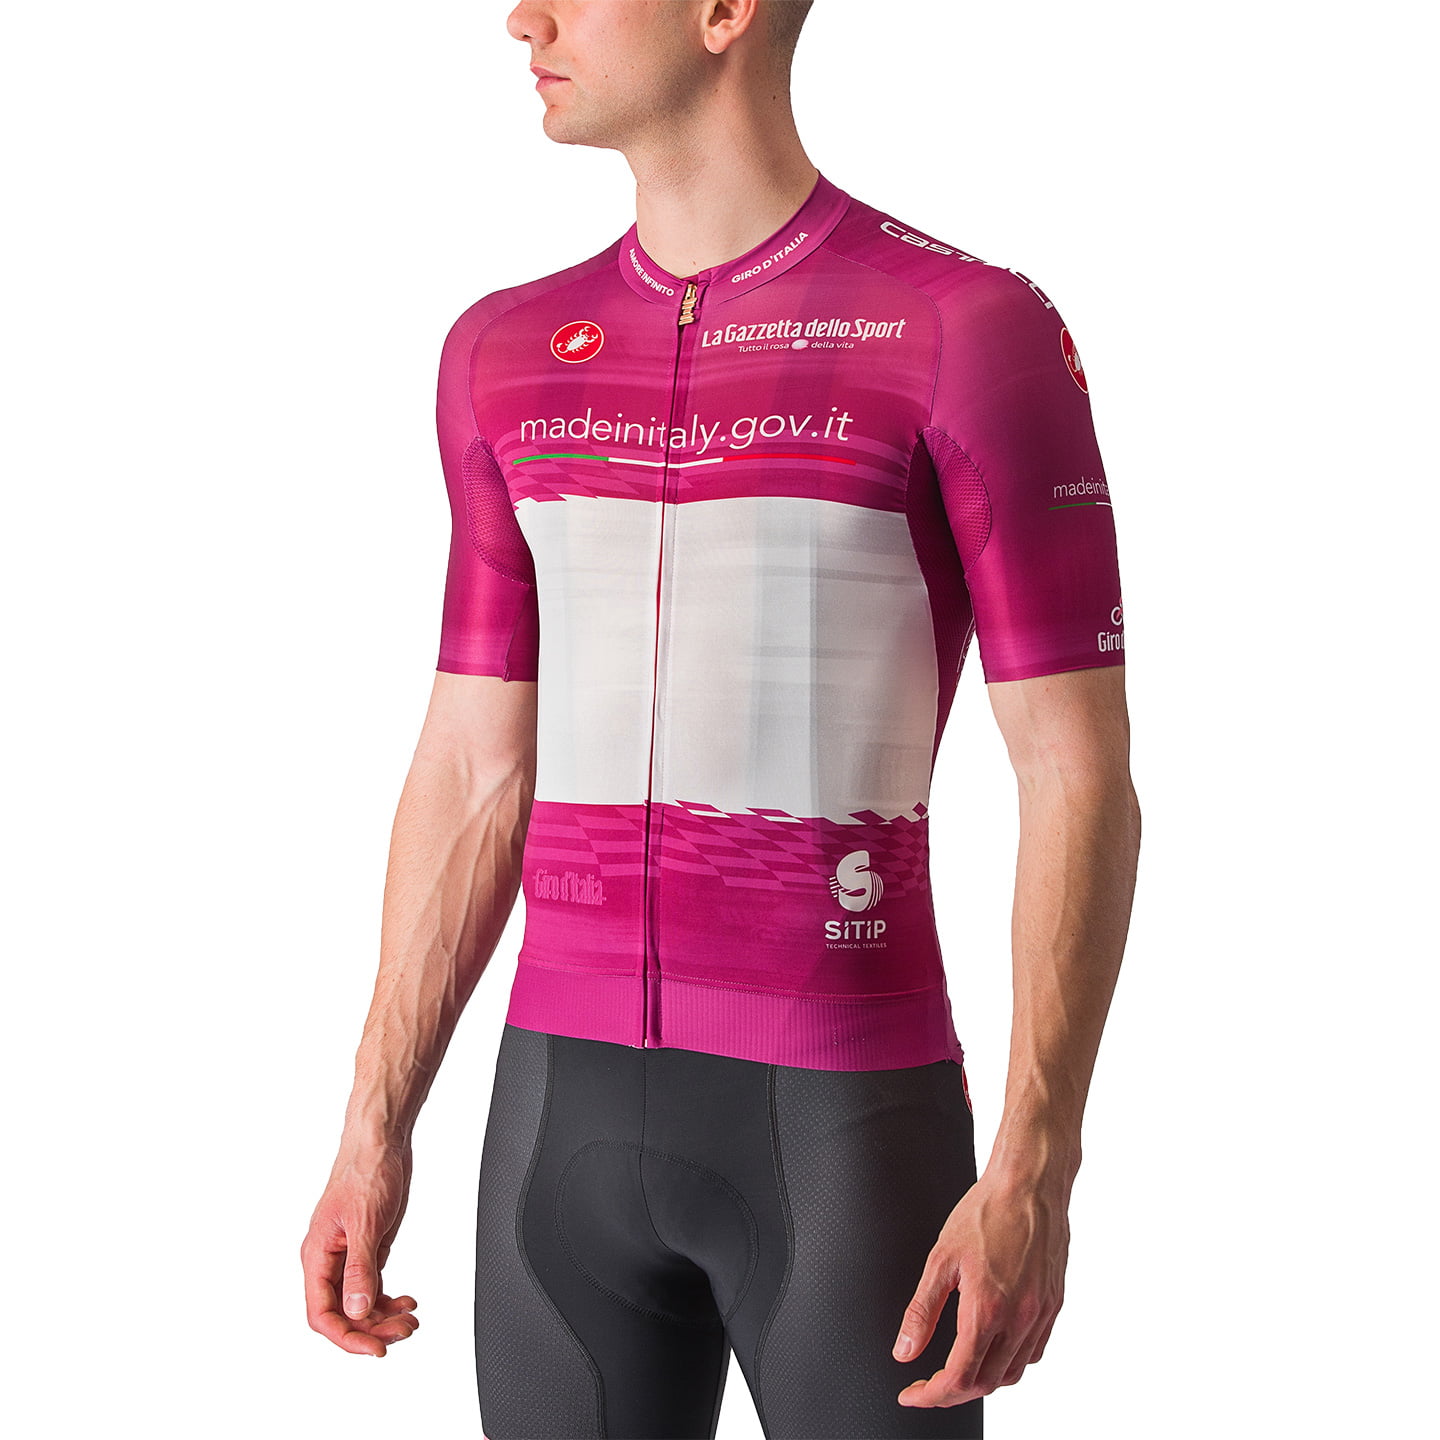 GIRO D’ITALIA Short Sleeve Race Jersey Maglia Ciclamino 2023 Short Sleeve Jersey, for men, size M, Cycle jersey, Cycling clothing